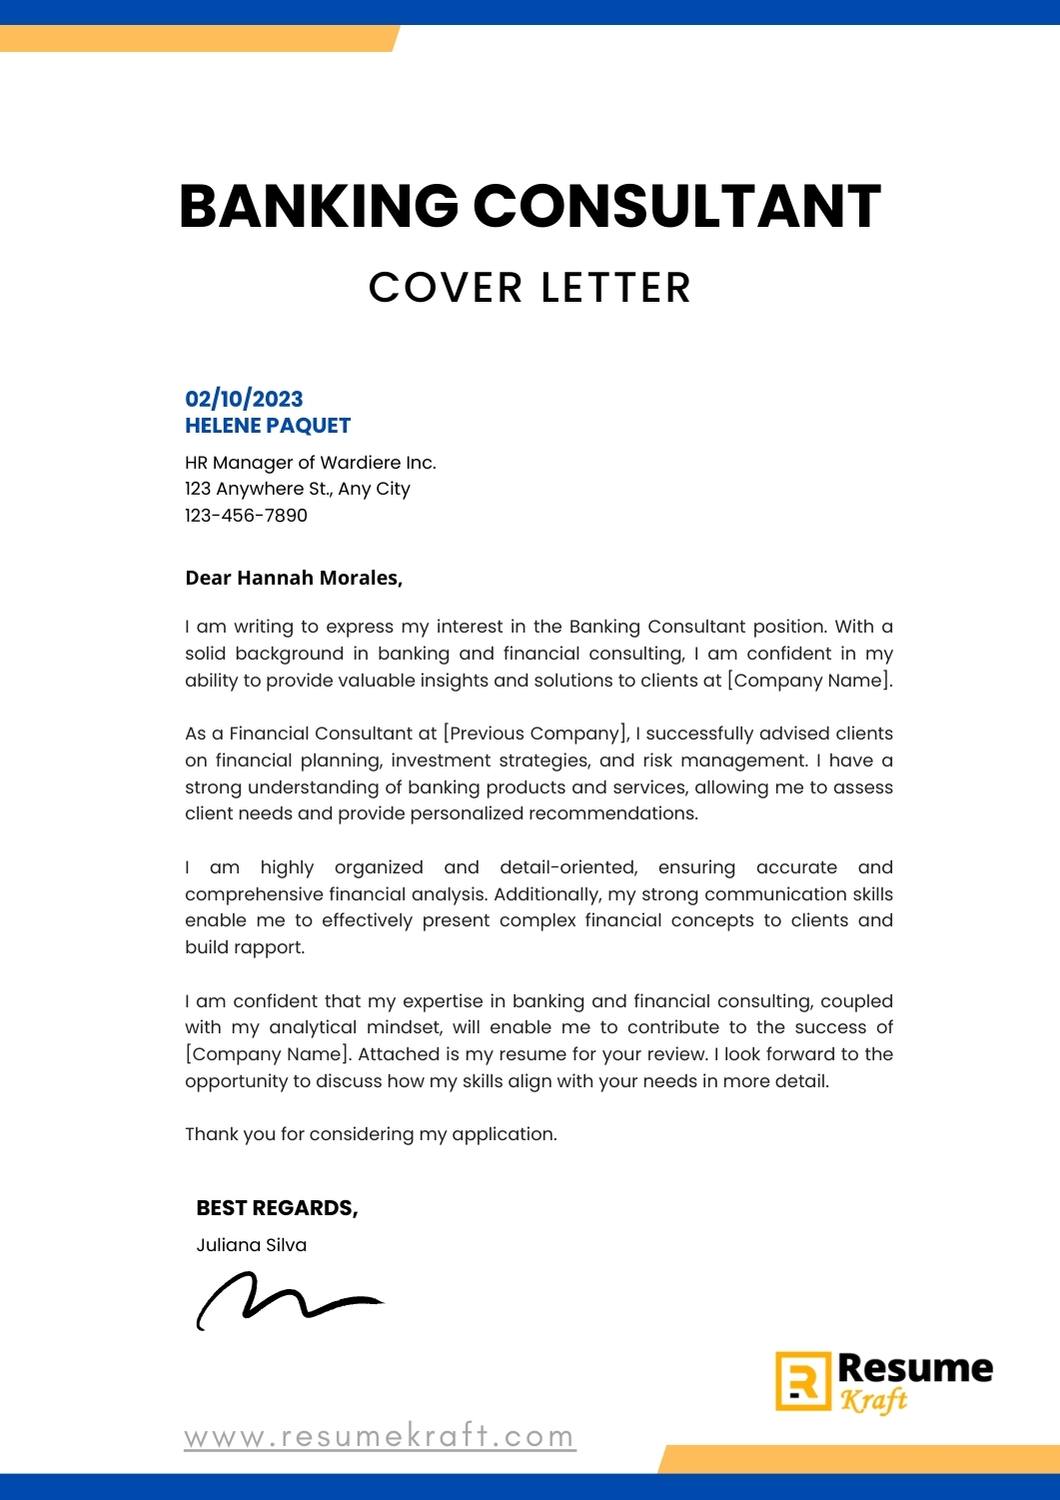 banking consultant cover letter